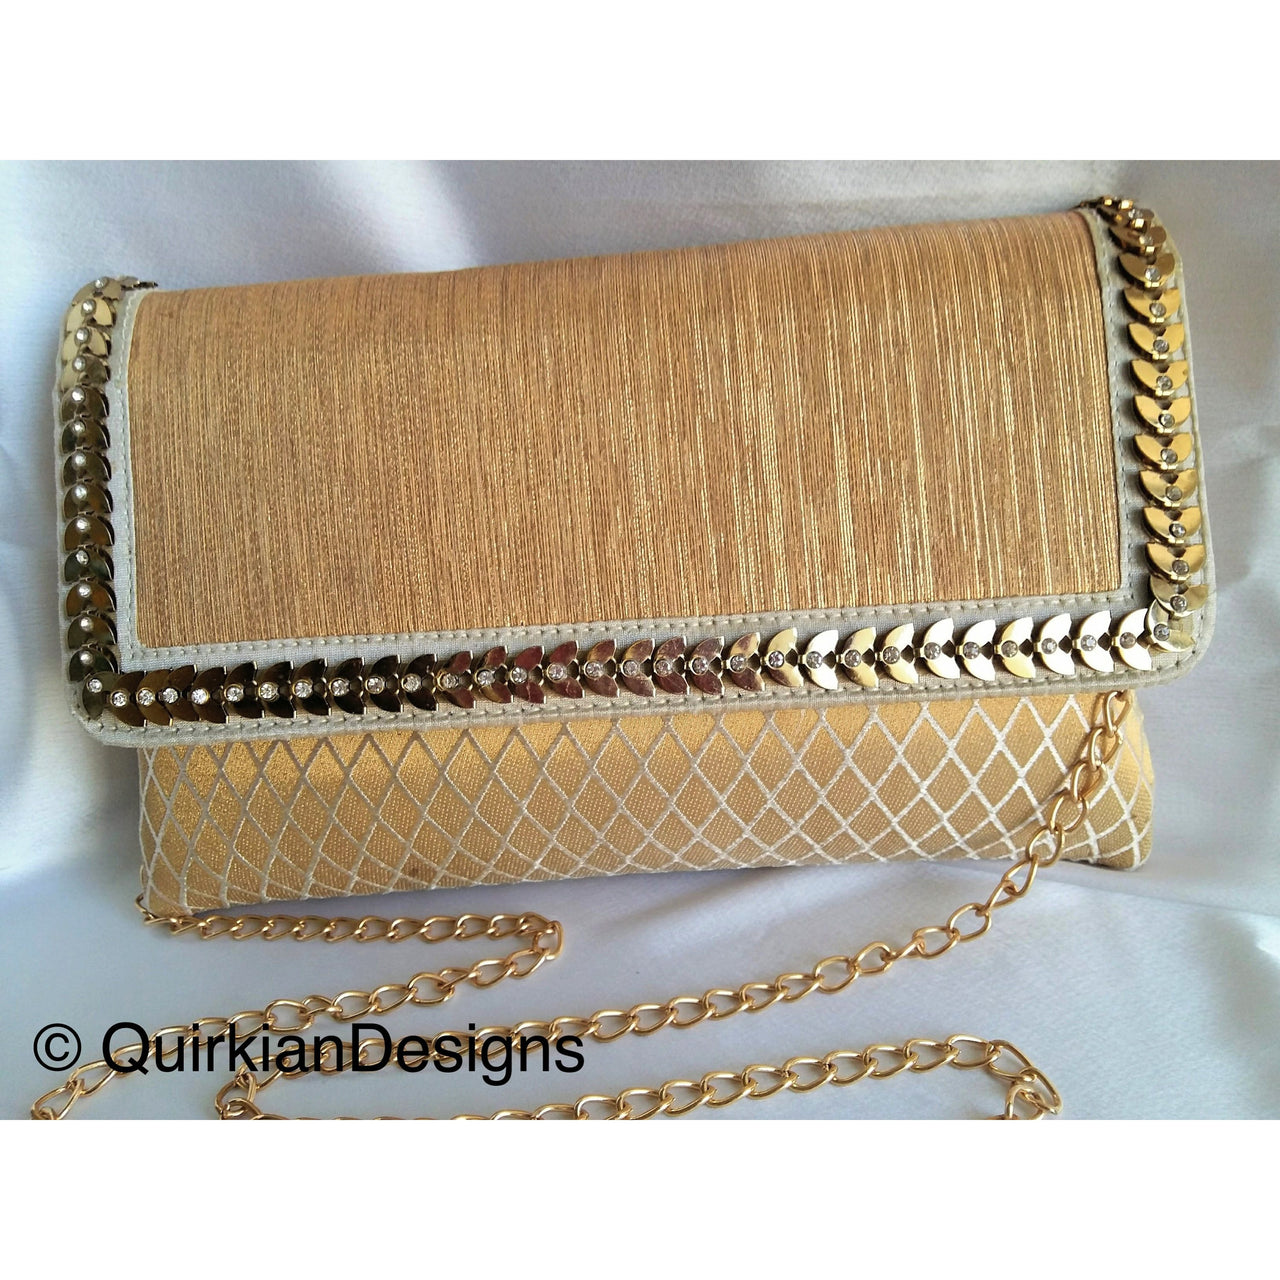 Beige, White And Copper Fabric Clutch Purse With Gold And Diamante Beads, Wedding Clutch, Party Bag